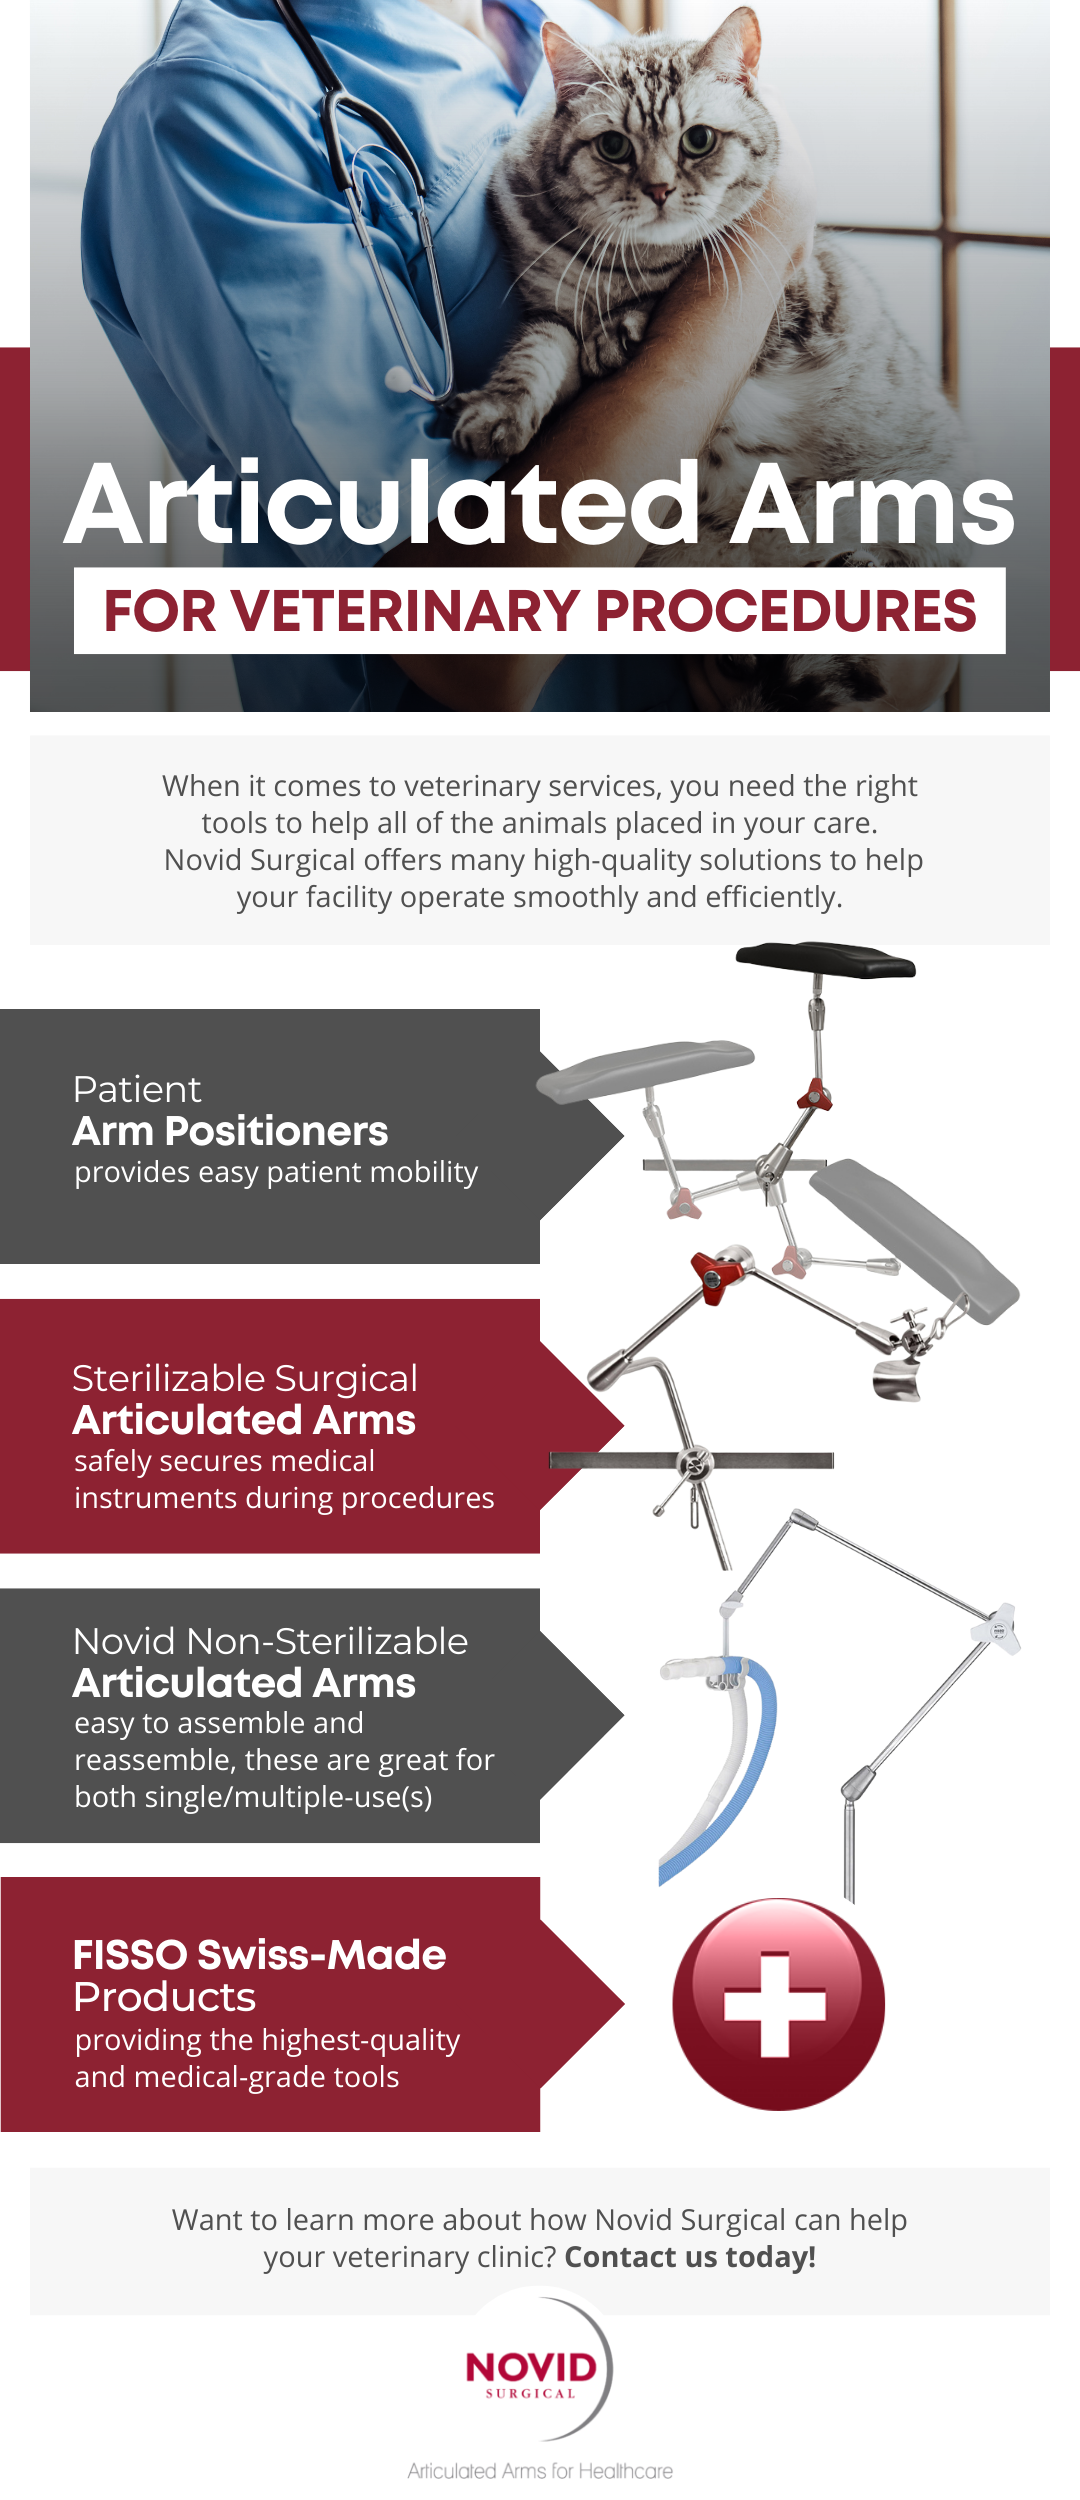 Articulated Arms for Veterinary Procedures (1)